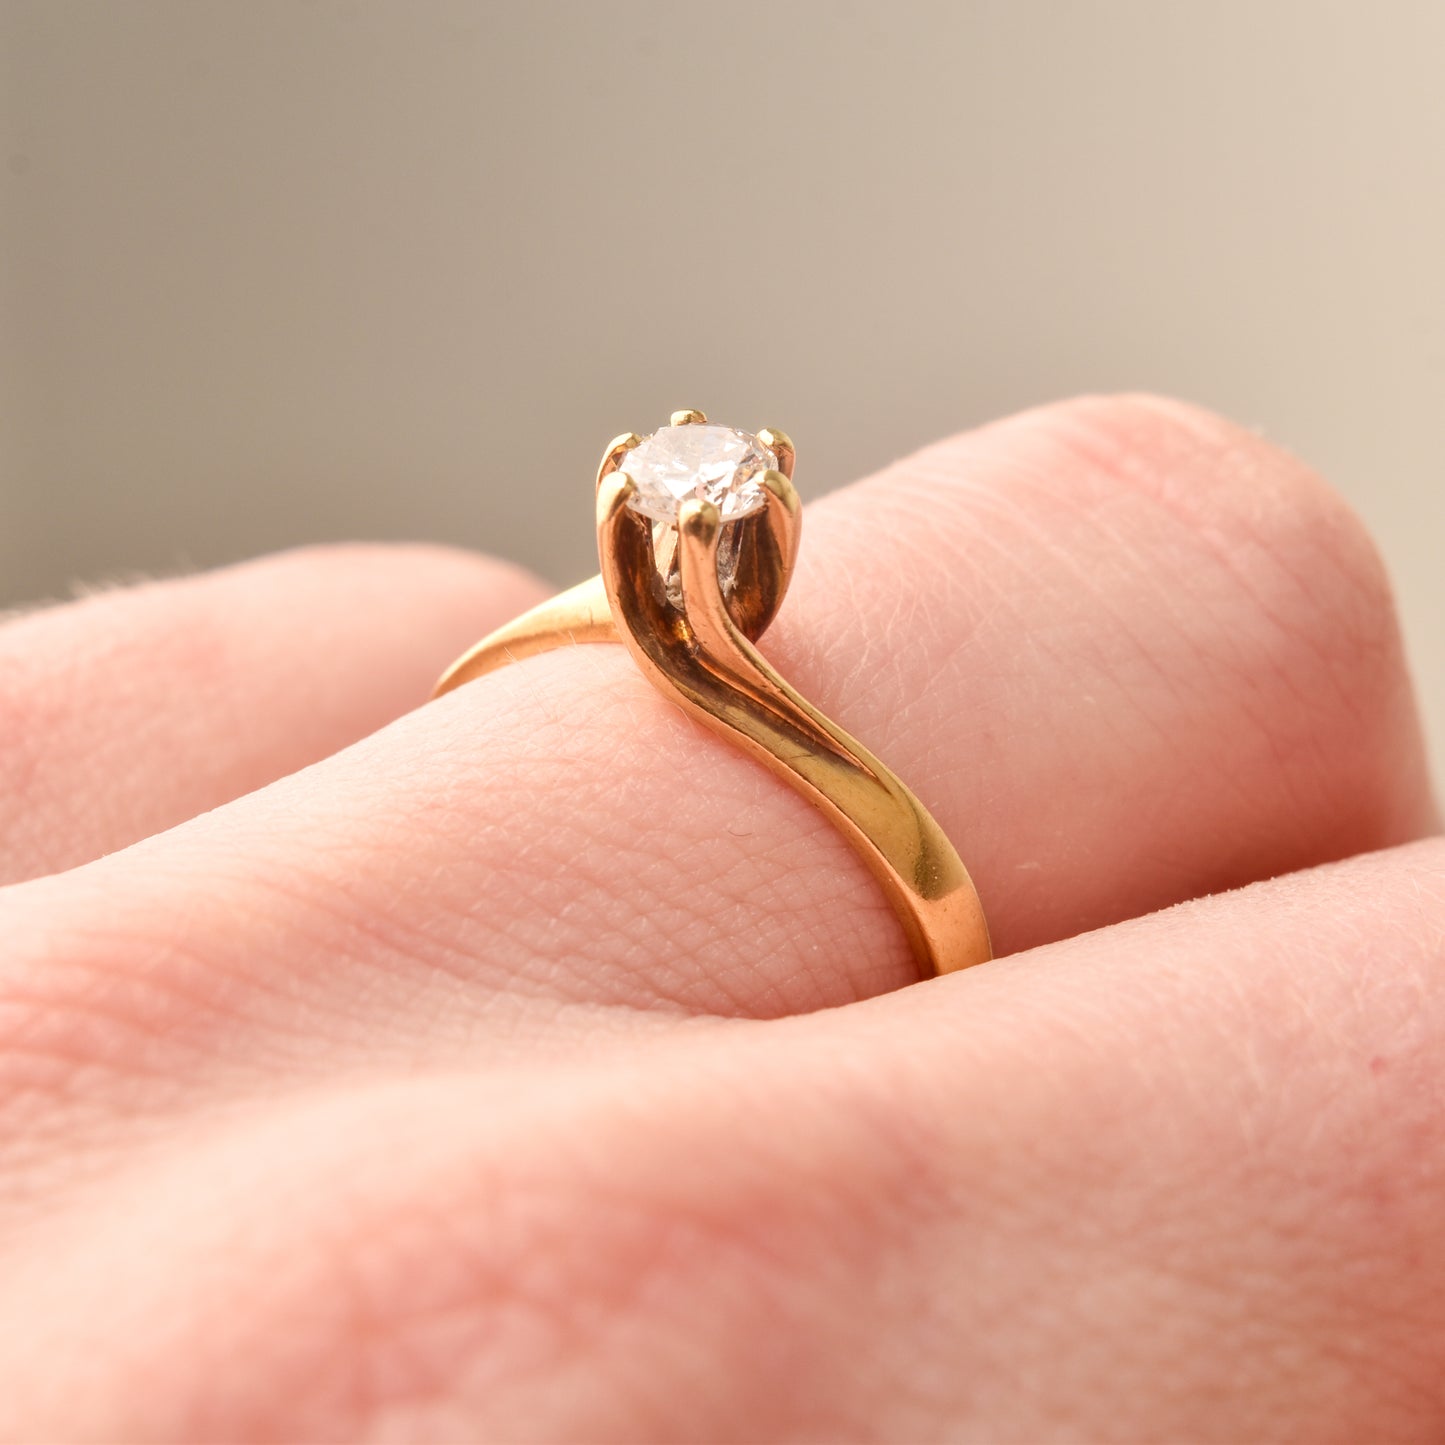 18K yellow gold diamond solitaire engagement ring with 6-prong spiral setting, showcased on a finger, size 7.5 US.